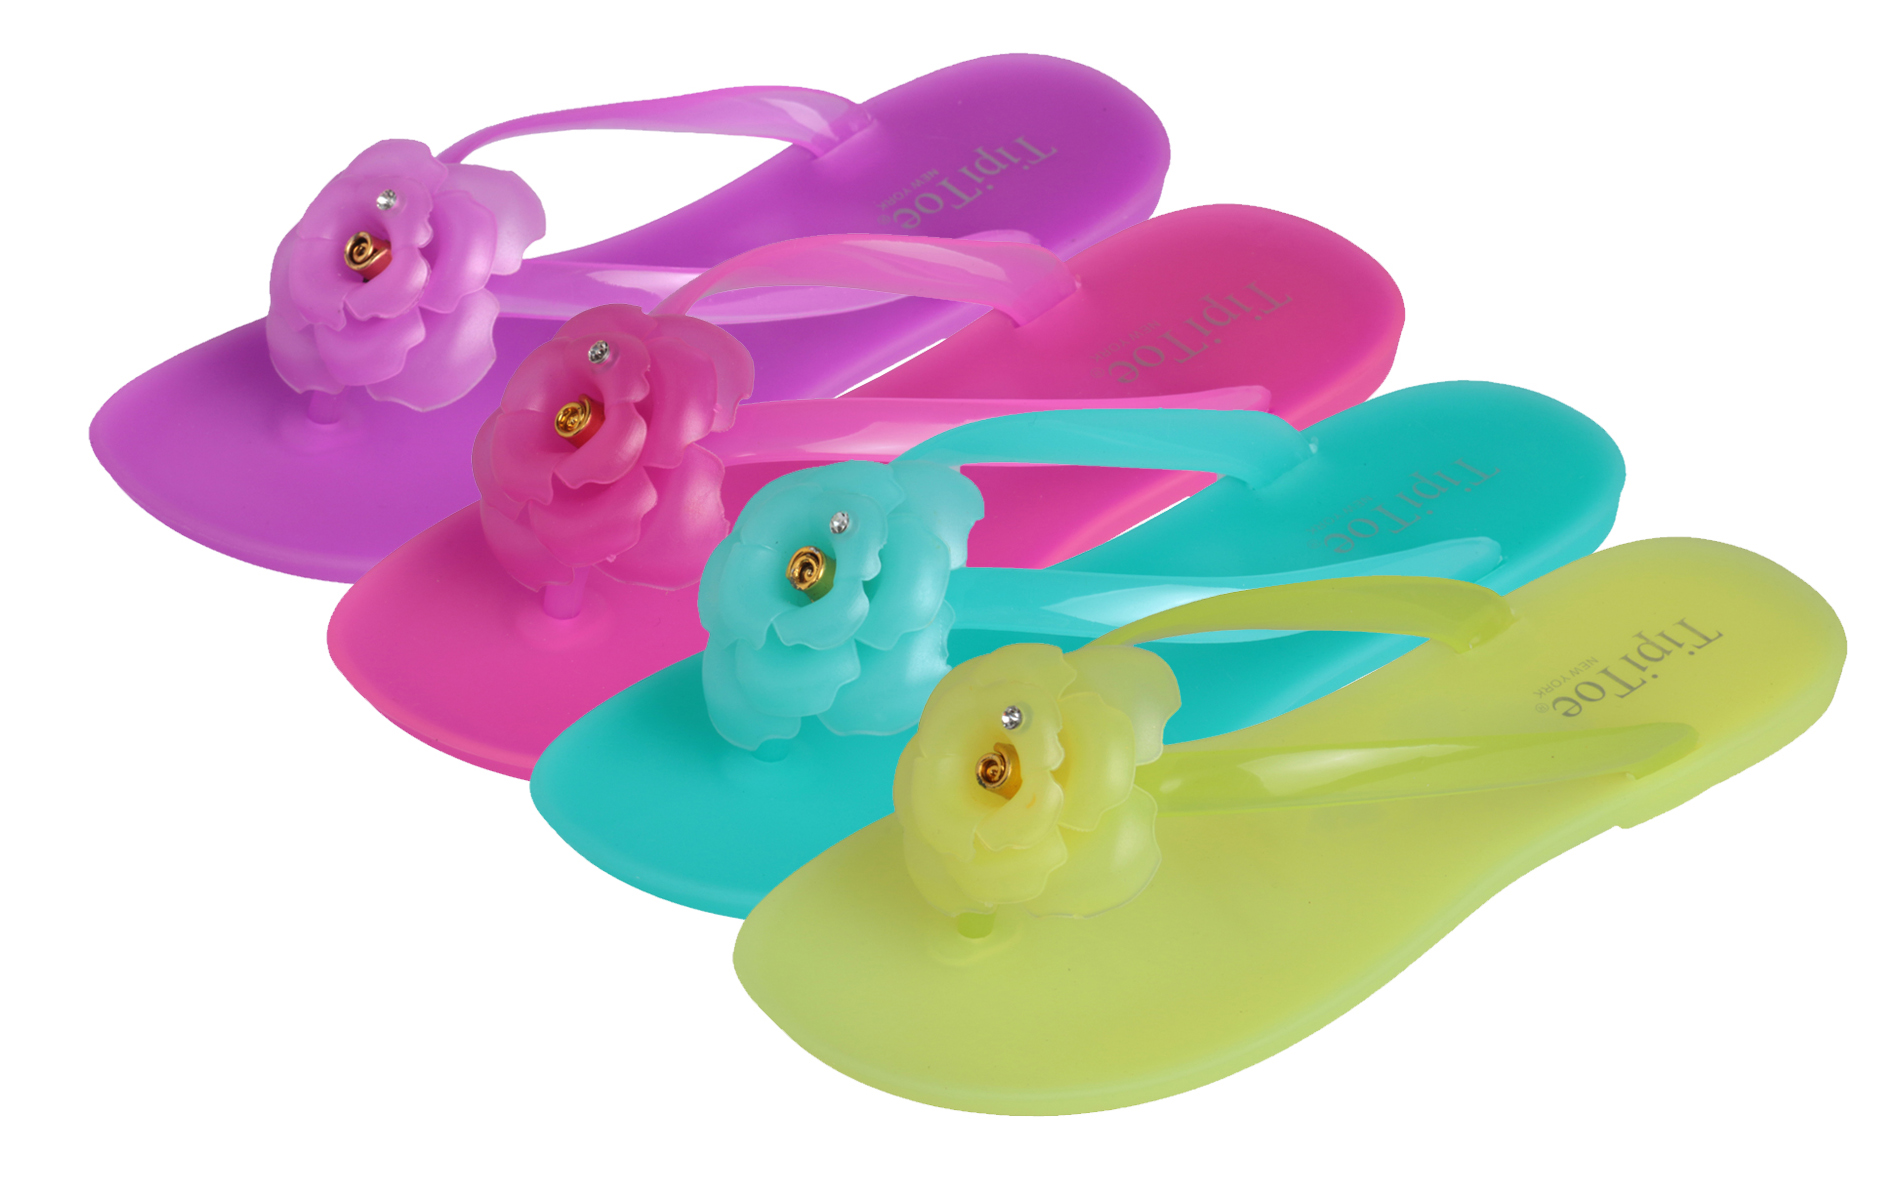 Wholesale Flip Flops now available at Wholesale Central - Items 1 - 40